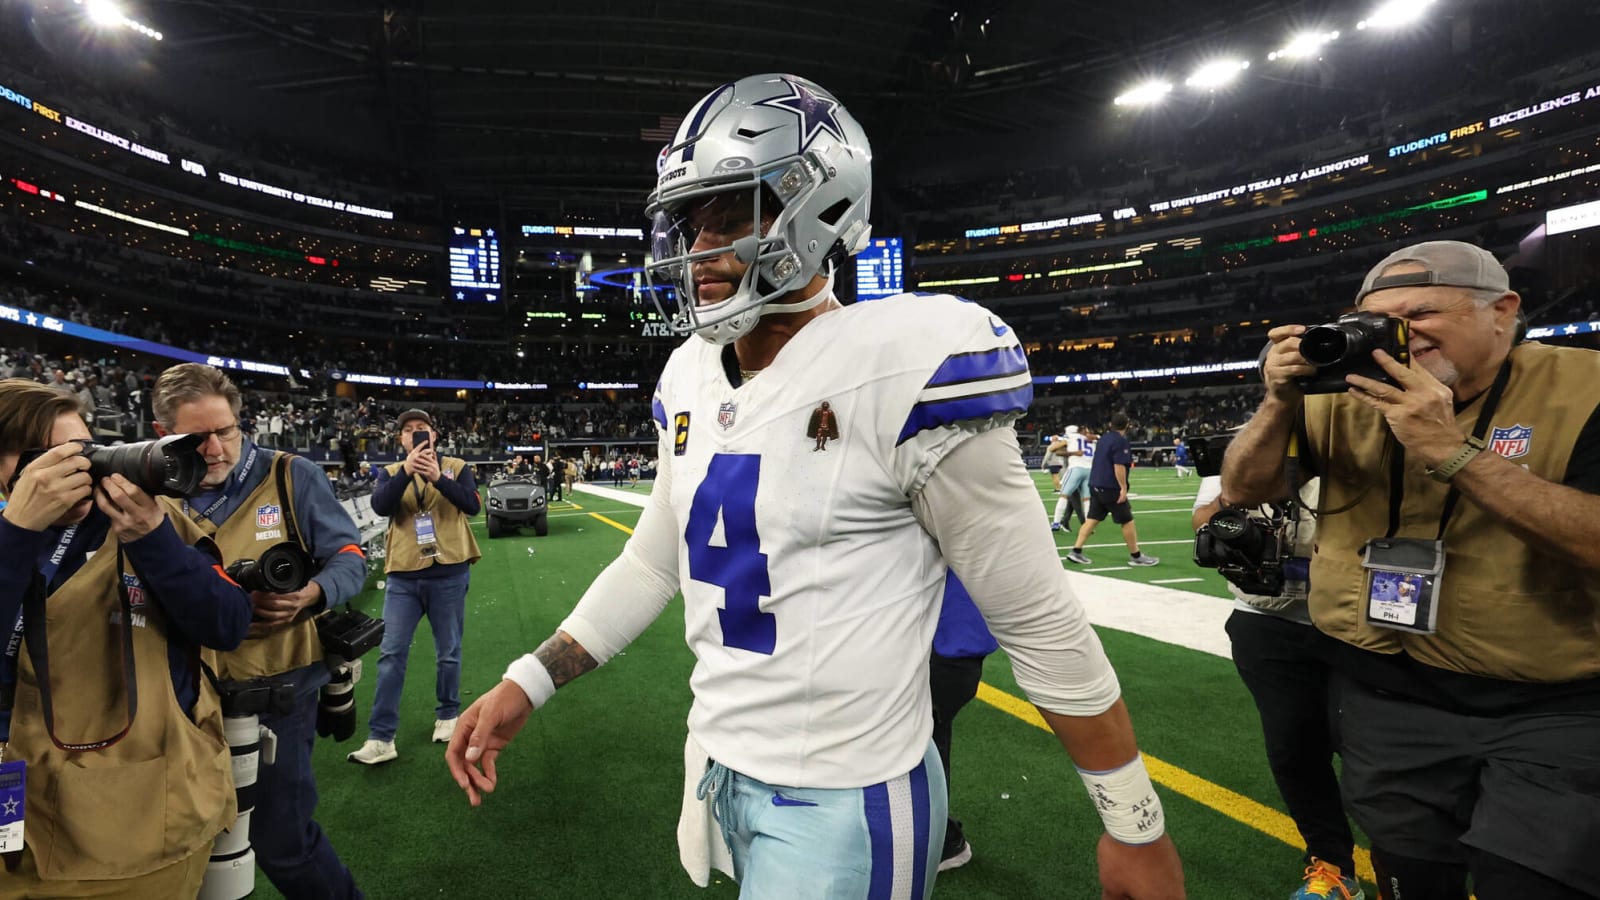 'I feel attacked!' Dak Prescott delivers resounding endorsement of Cowboys’ culture amidst controversial comments from Micah Parsons and teammates